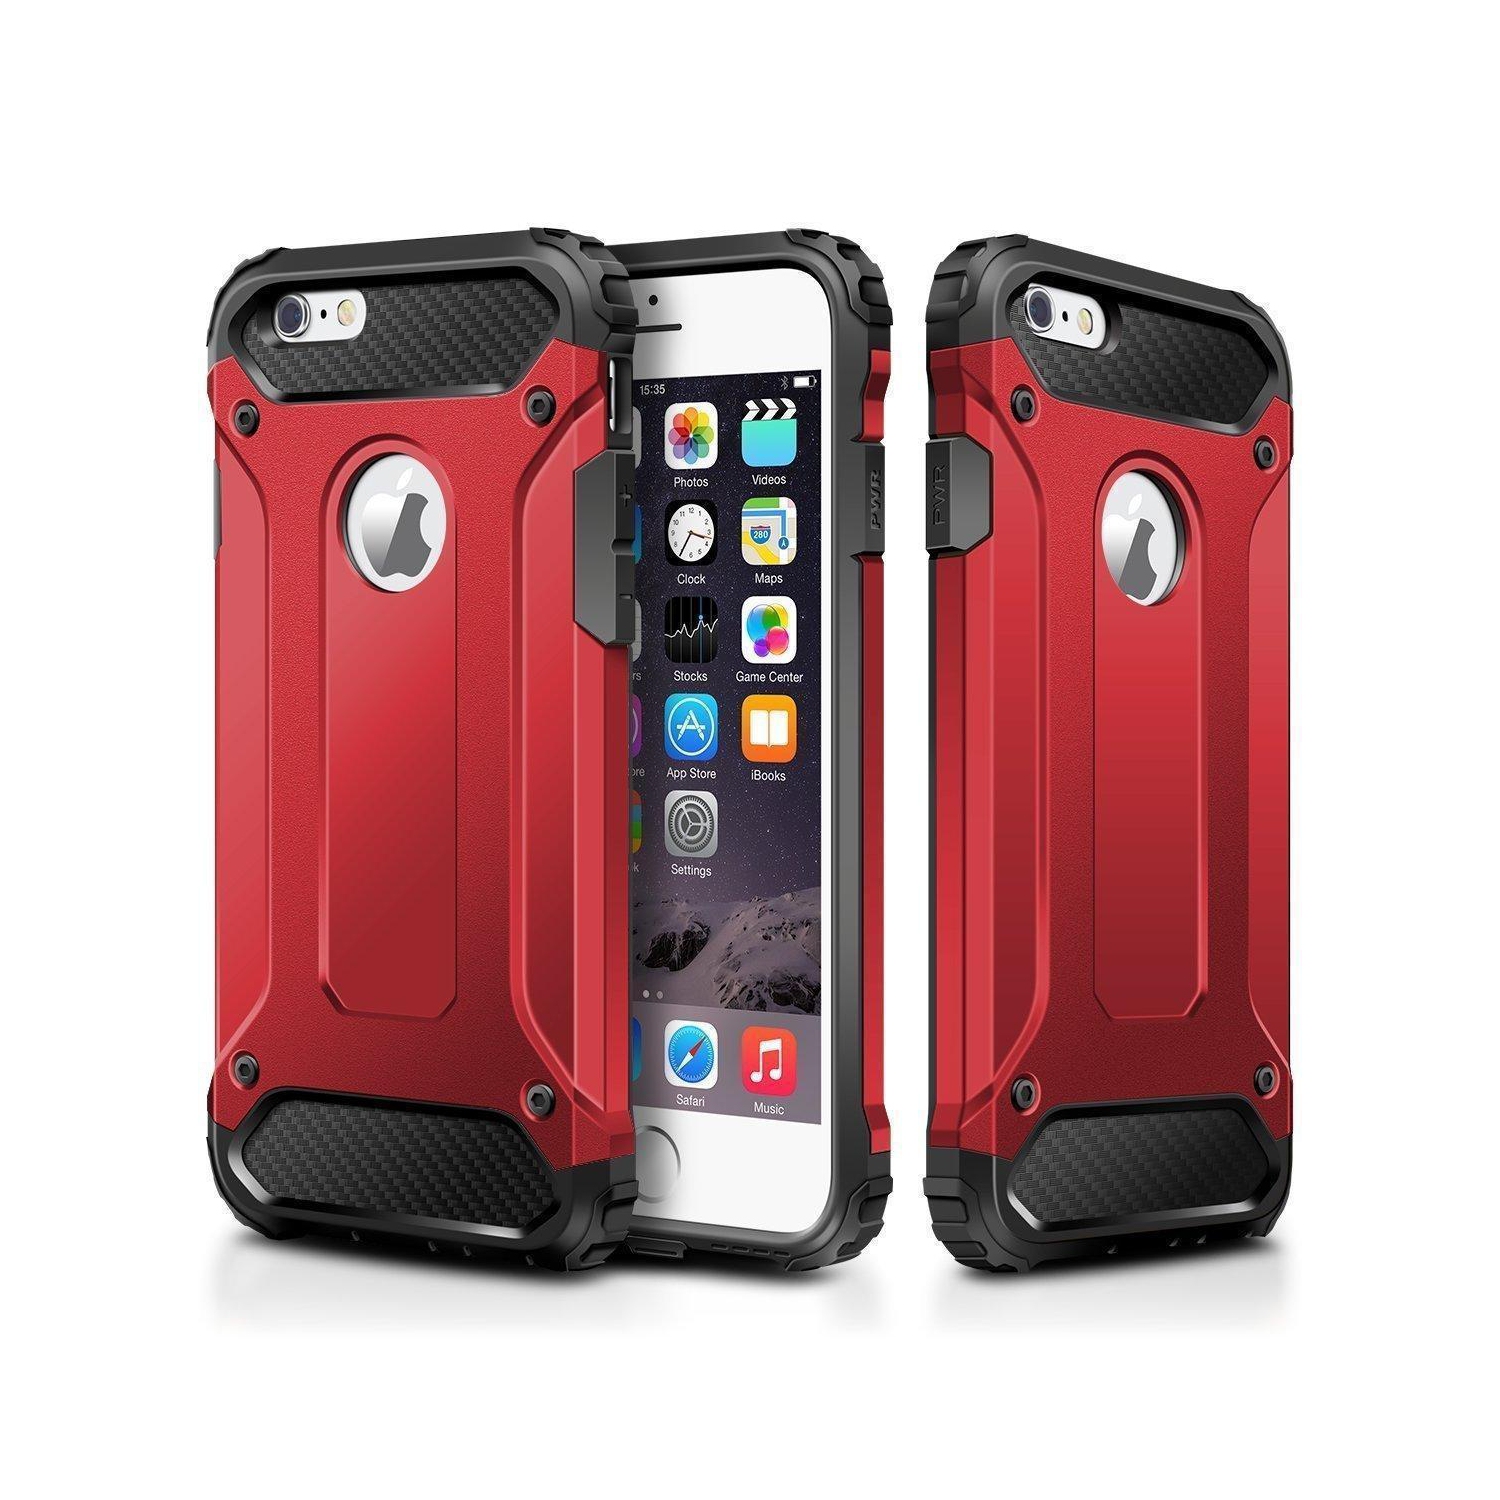 Hybrid Armor Shockproof Rugged Bumper Case For Apple iPhone 6 Plus / 6s Plus (Red)